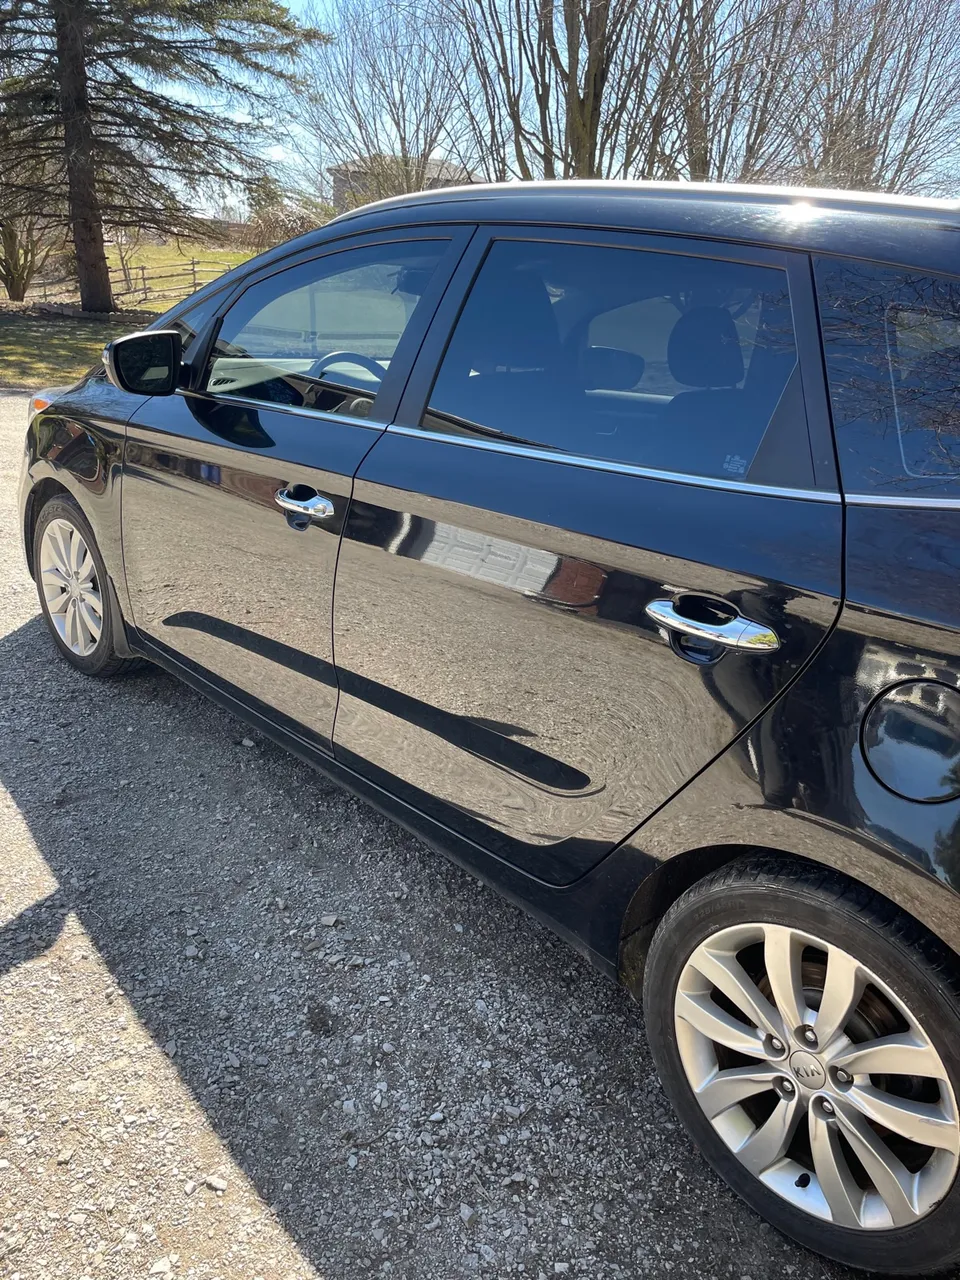 Kia rondo 2014 only 3,000 kms on new engine